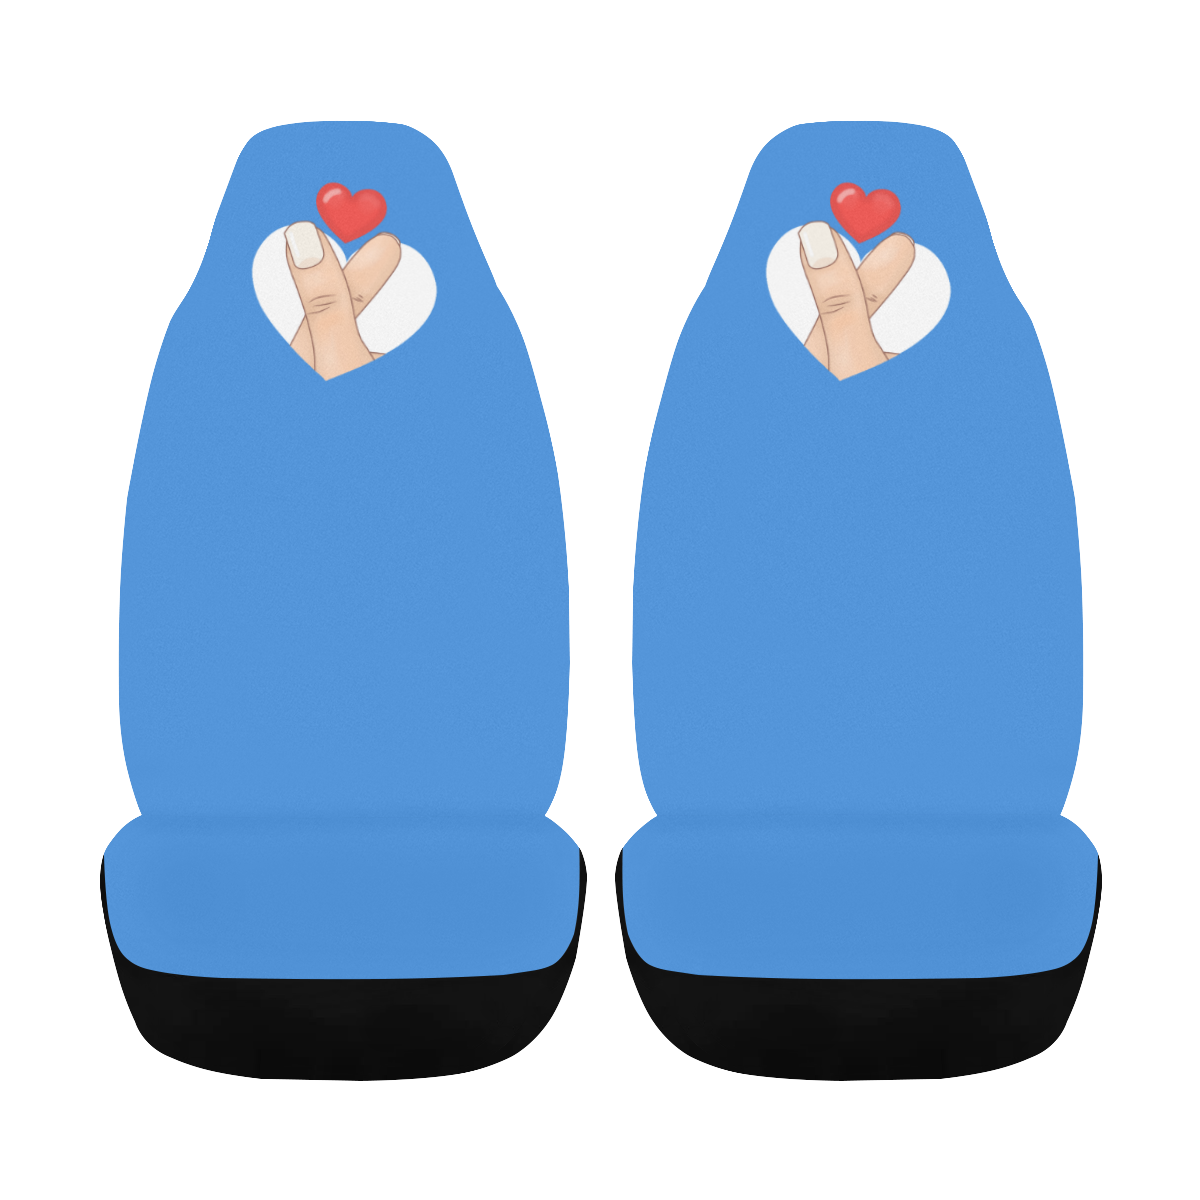 Red Heart Fingers on Blue Car Seat Cover Airbag Compatible (Set of 2)